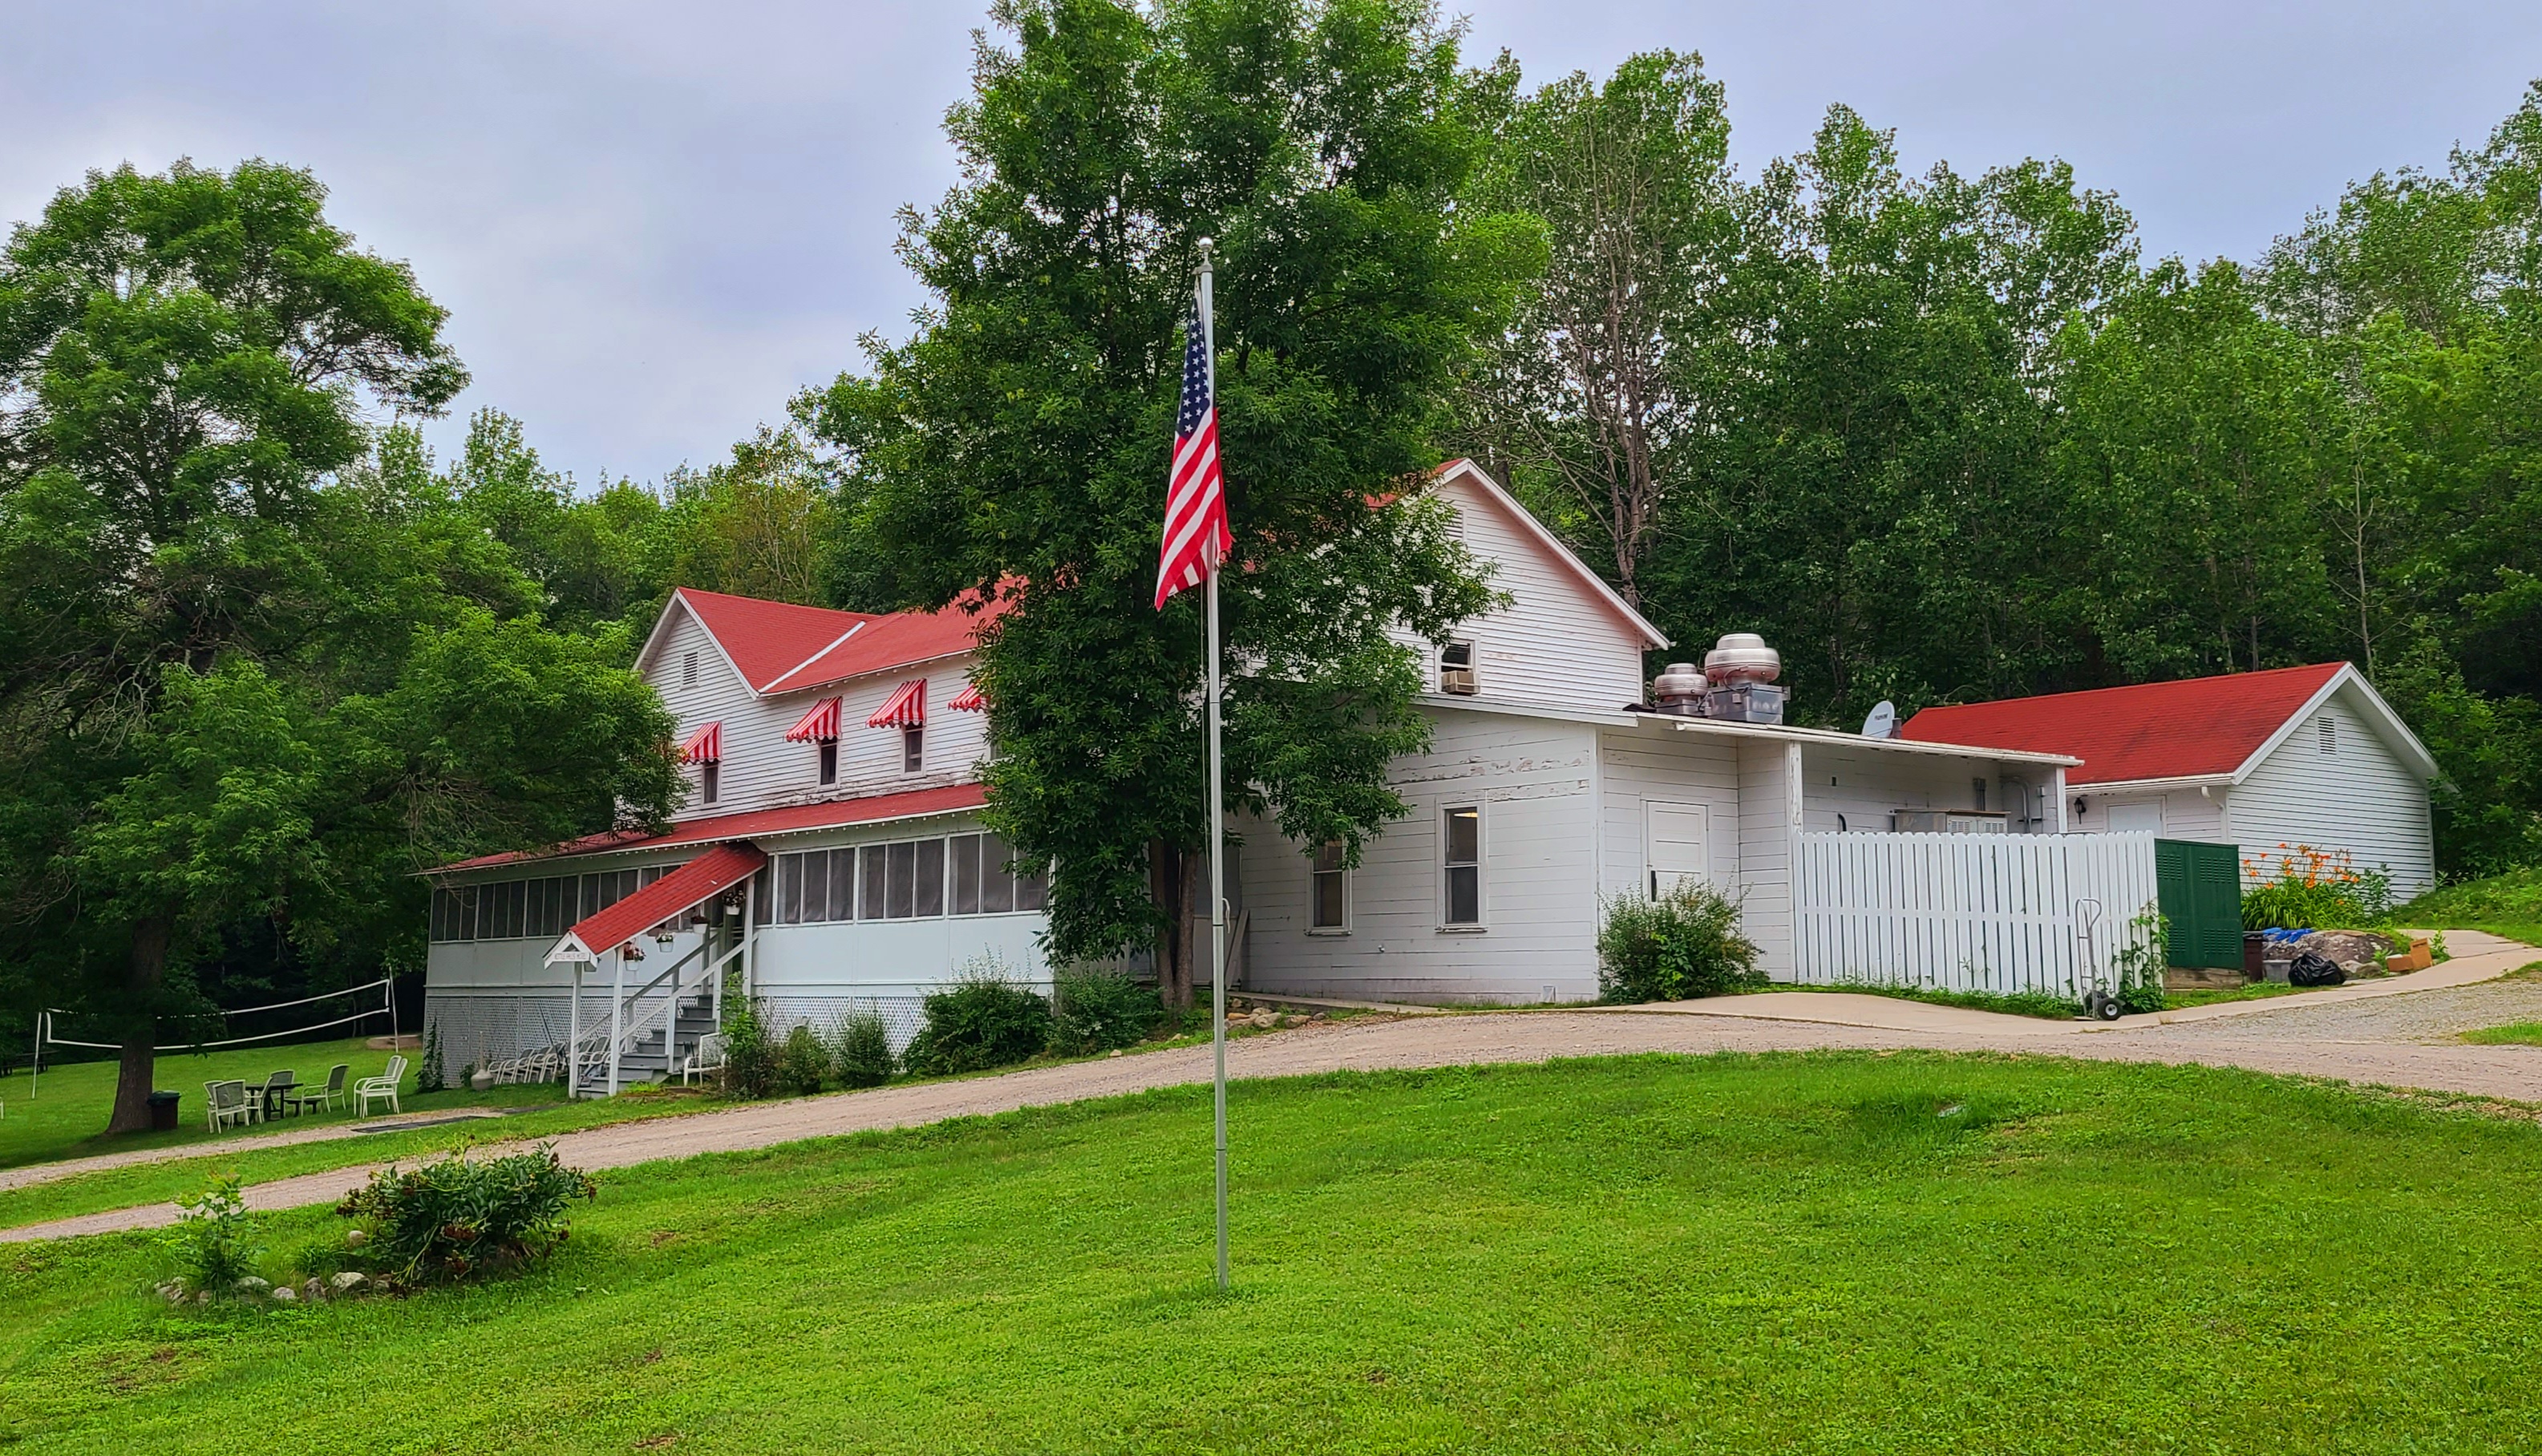 Historic red and white Kettle Falls Hotel with American flag and surrounding grounds.